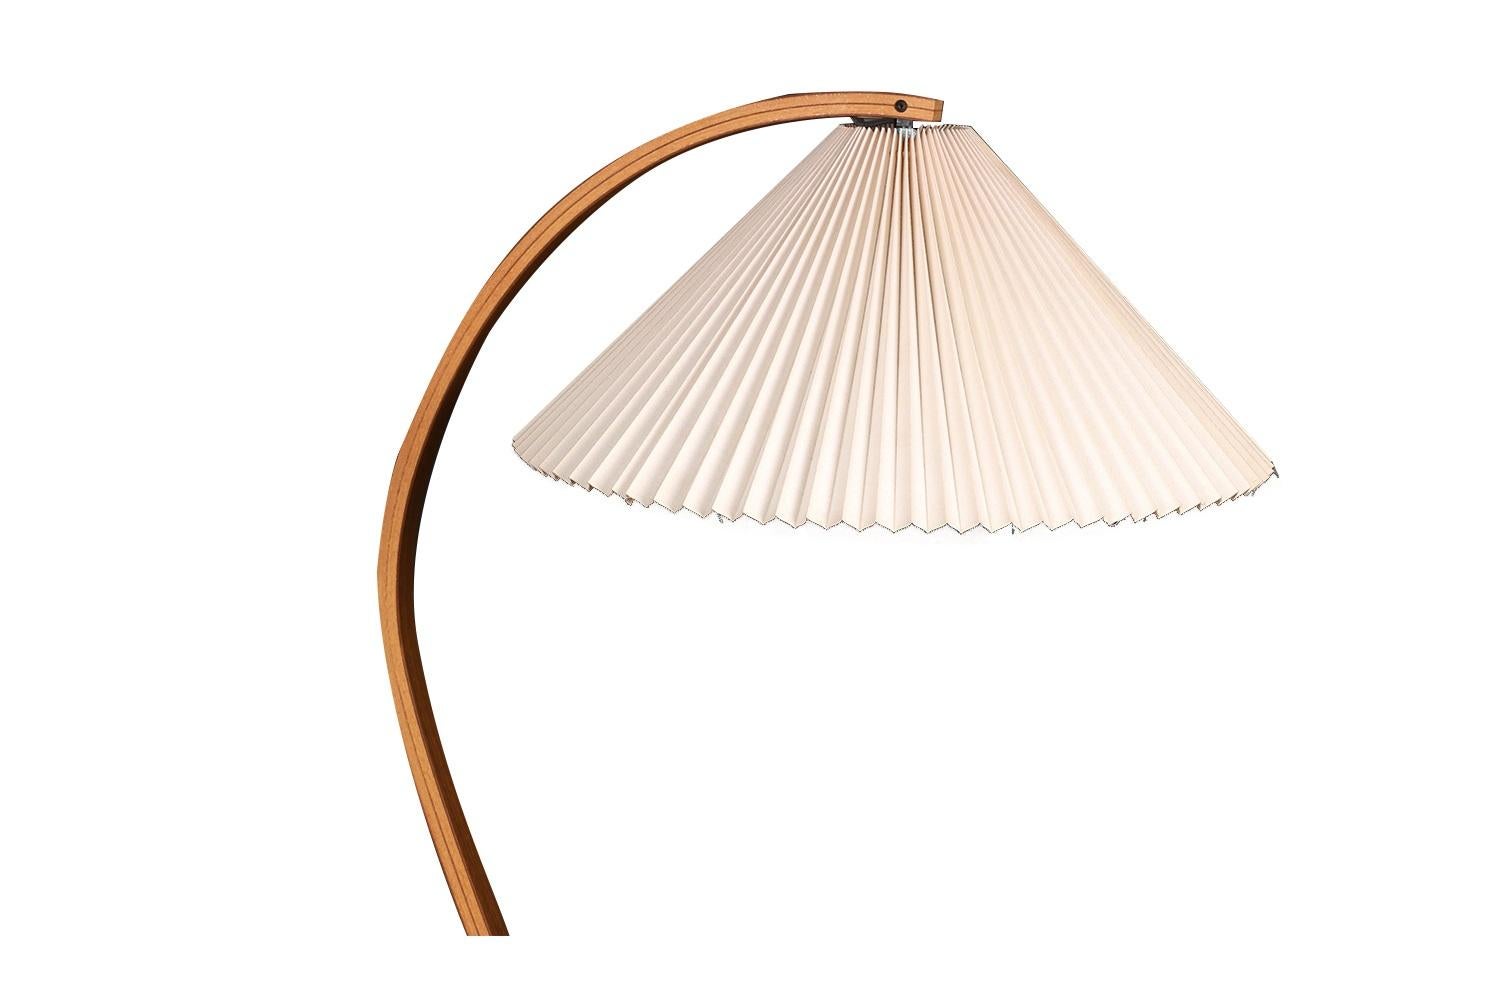 Stunning mid century original, vintage bentwood, Danish floor lamp by Mads Caprani circa 1970s. Features pleated linen shade atop dramatic curve, bentwood stand supported by a dense black, cast iron crescent-shaped base for balance, original wiring